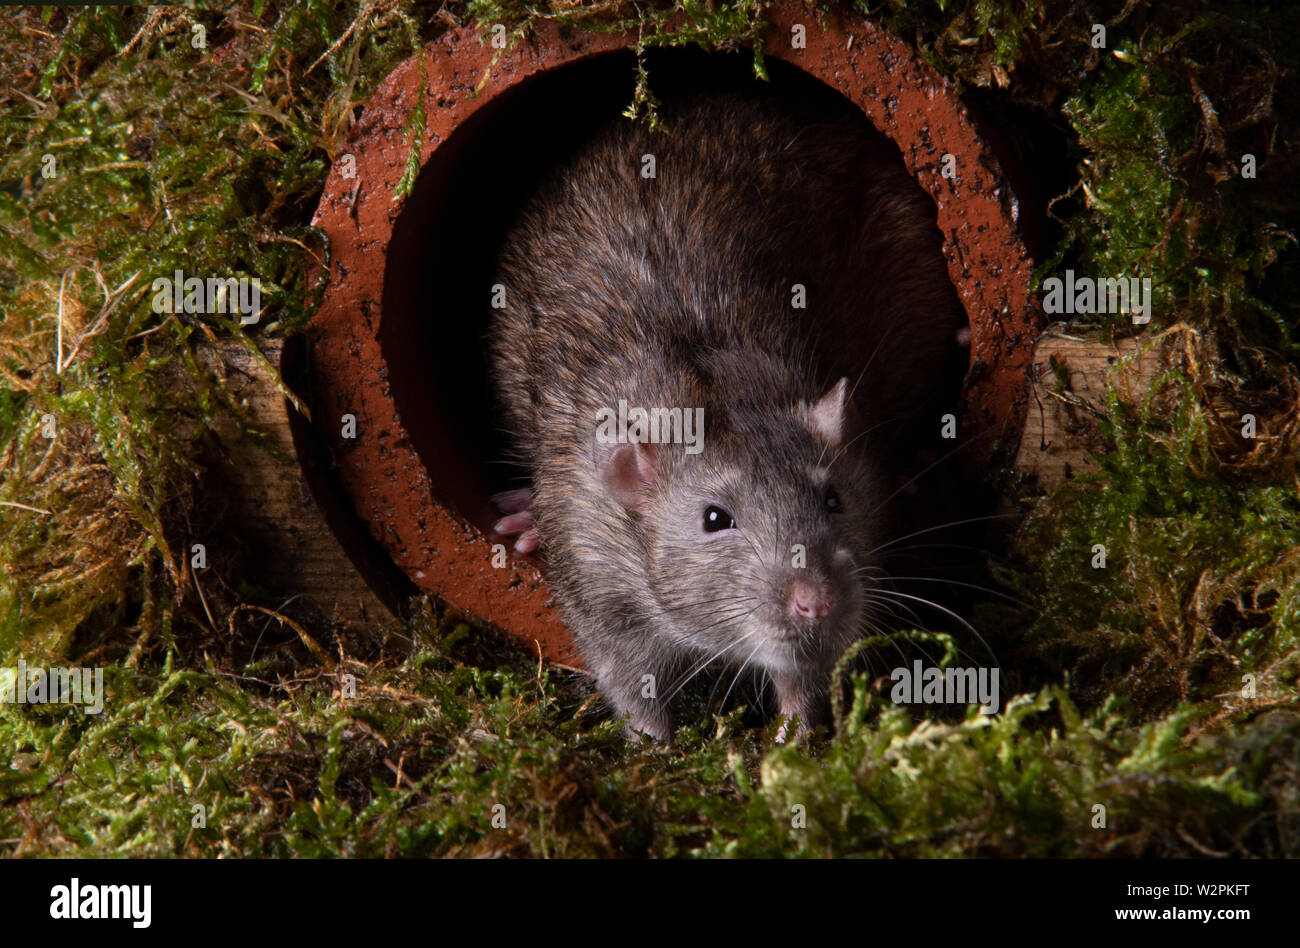 a wild rat in a studio setting emerging from a water pipe Stock Photo